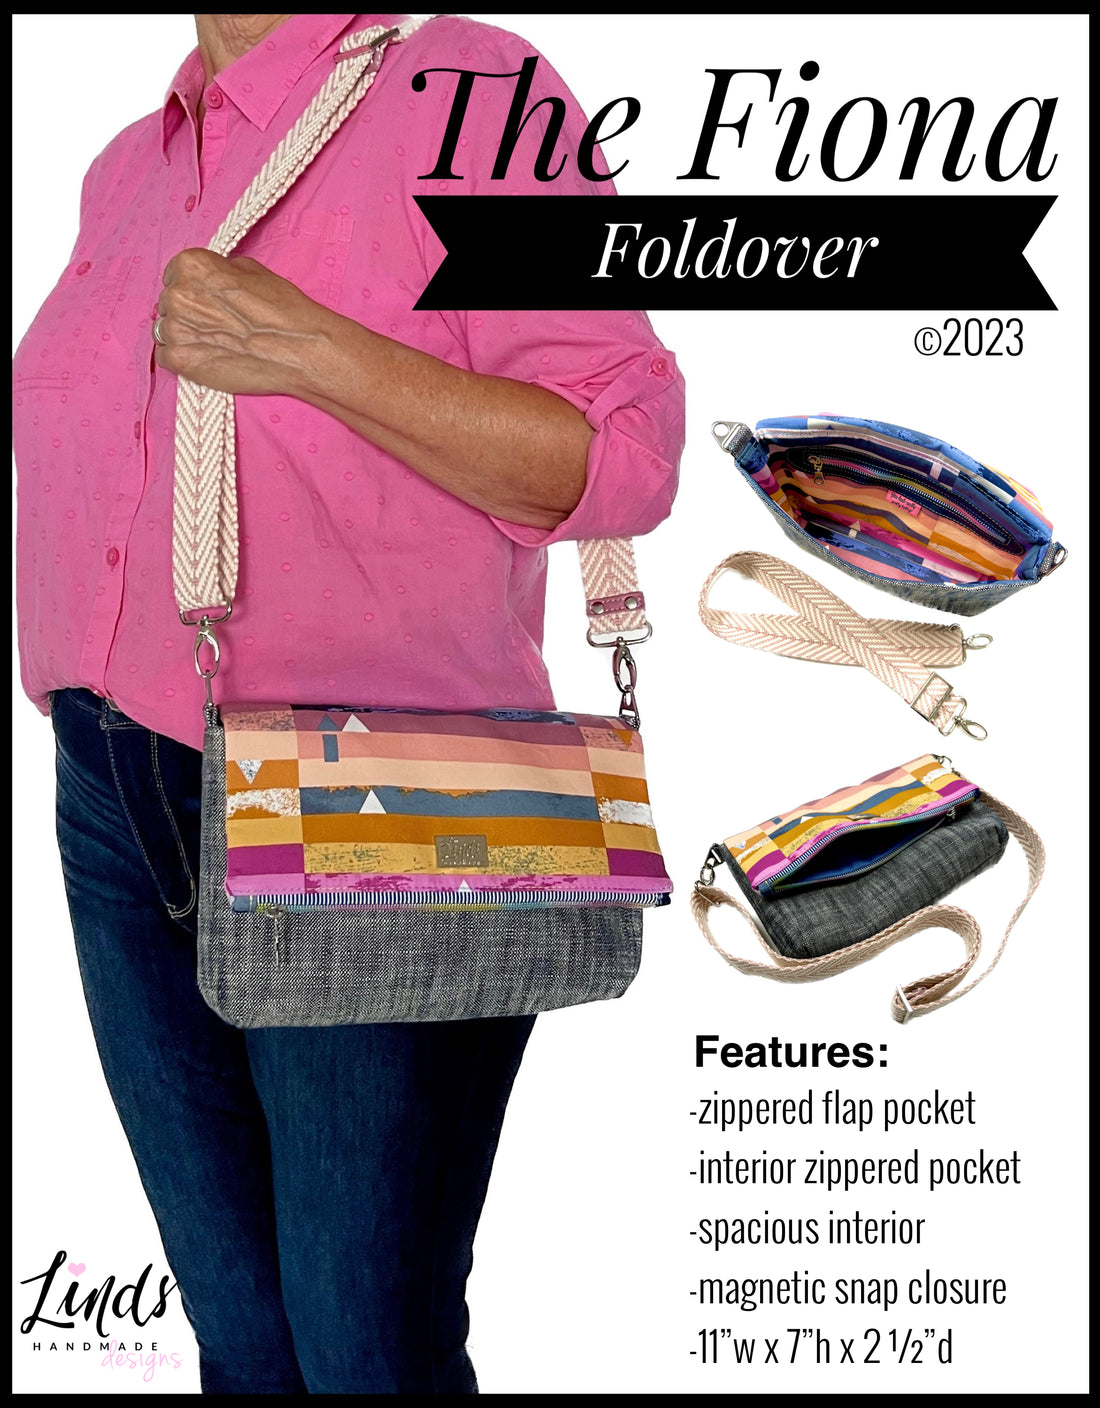 Fiona's Freeway PDF Pattern - Bag Sewing Patterns by ChrisW Designs